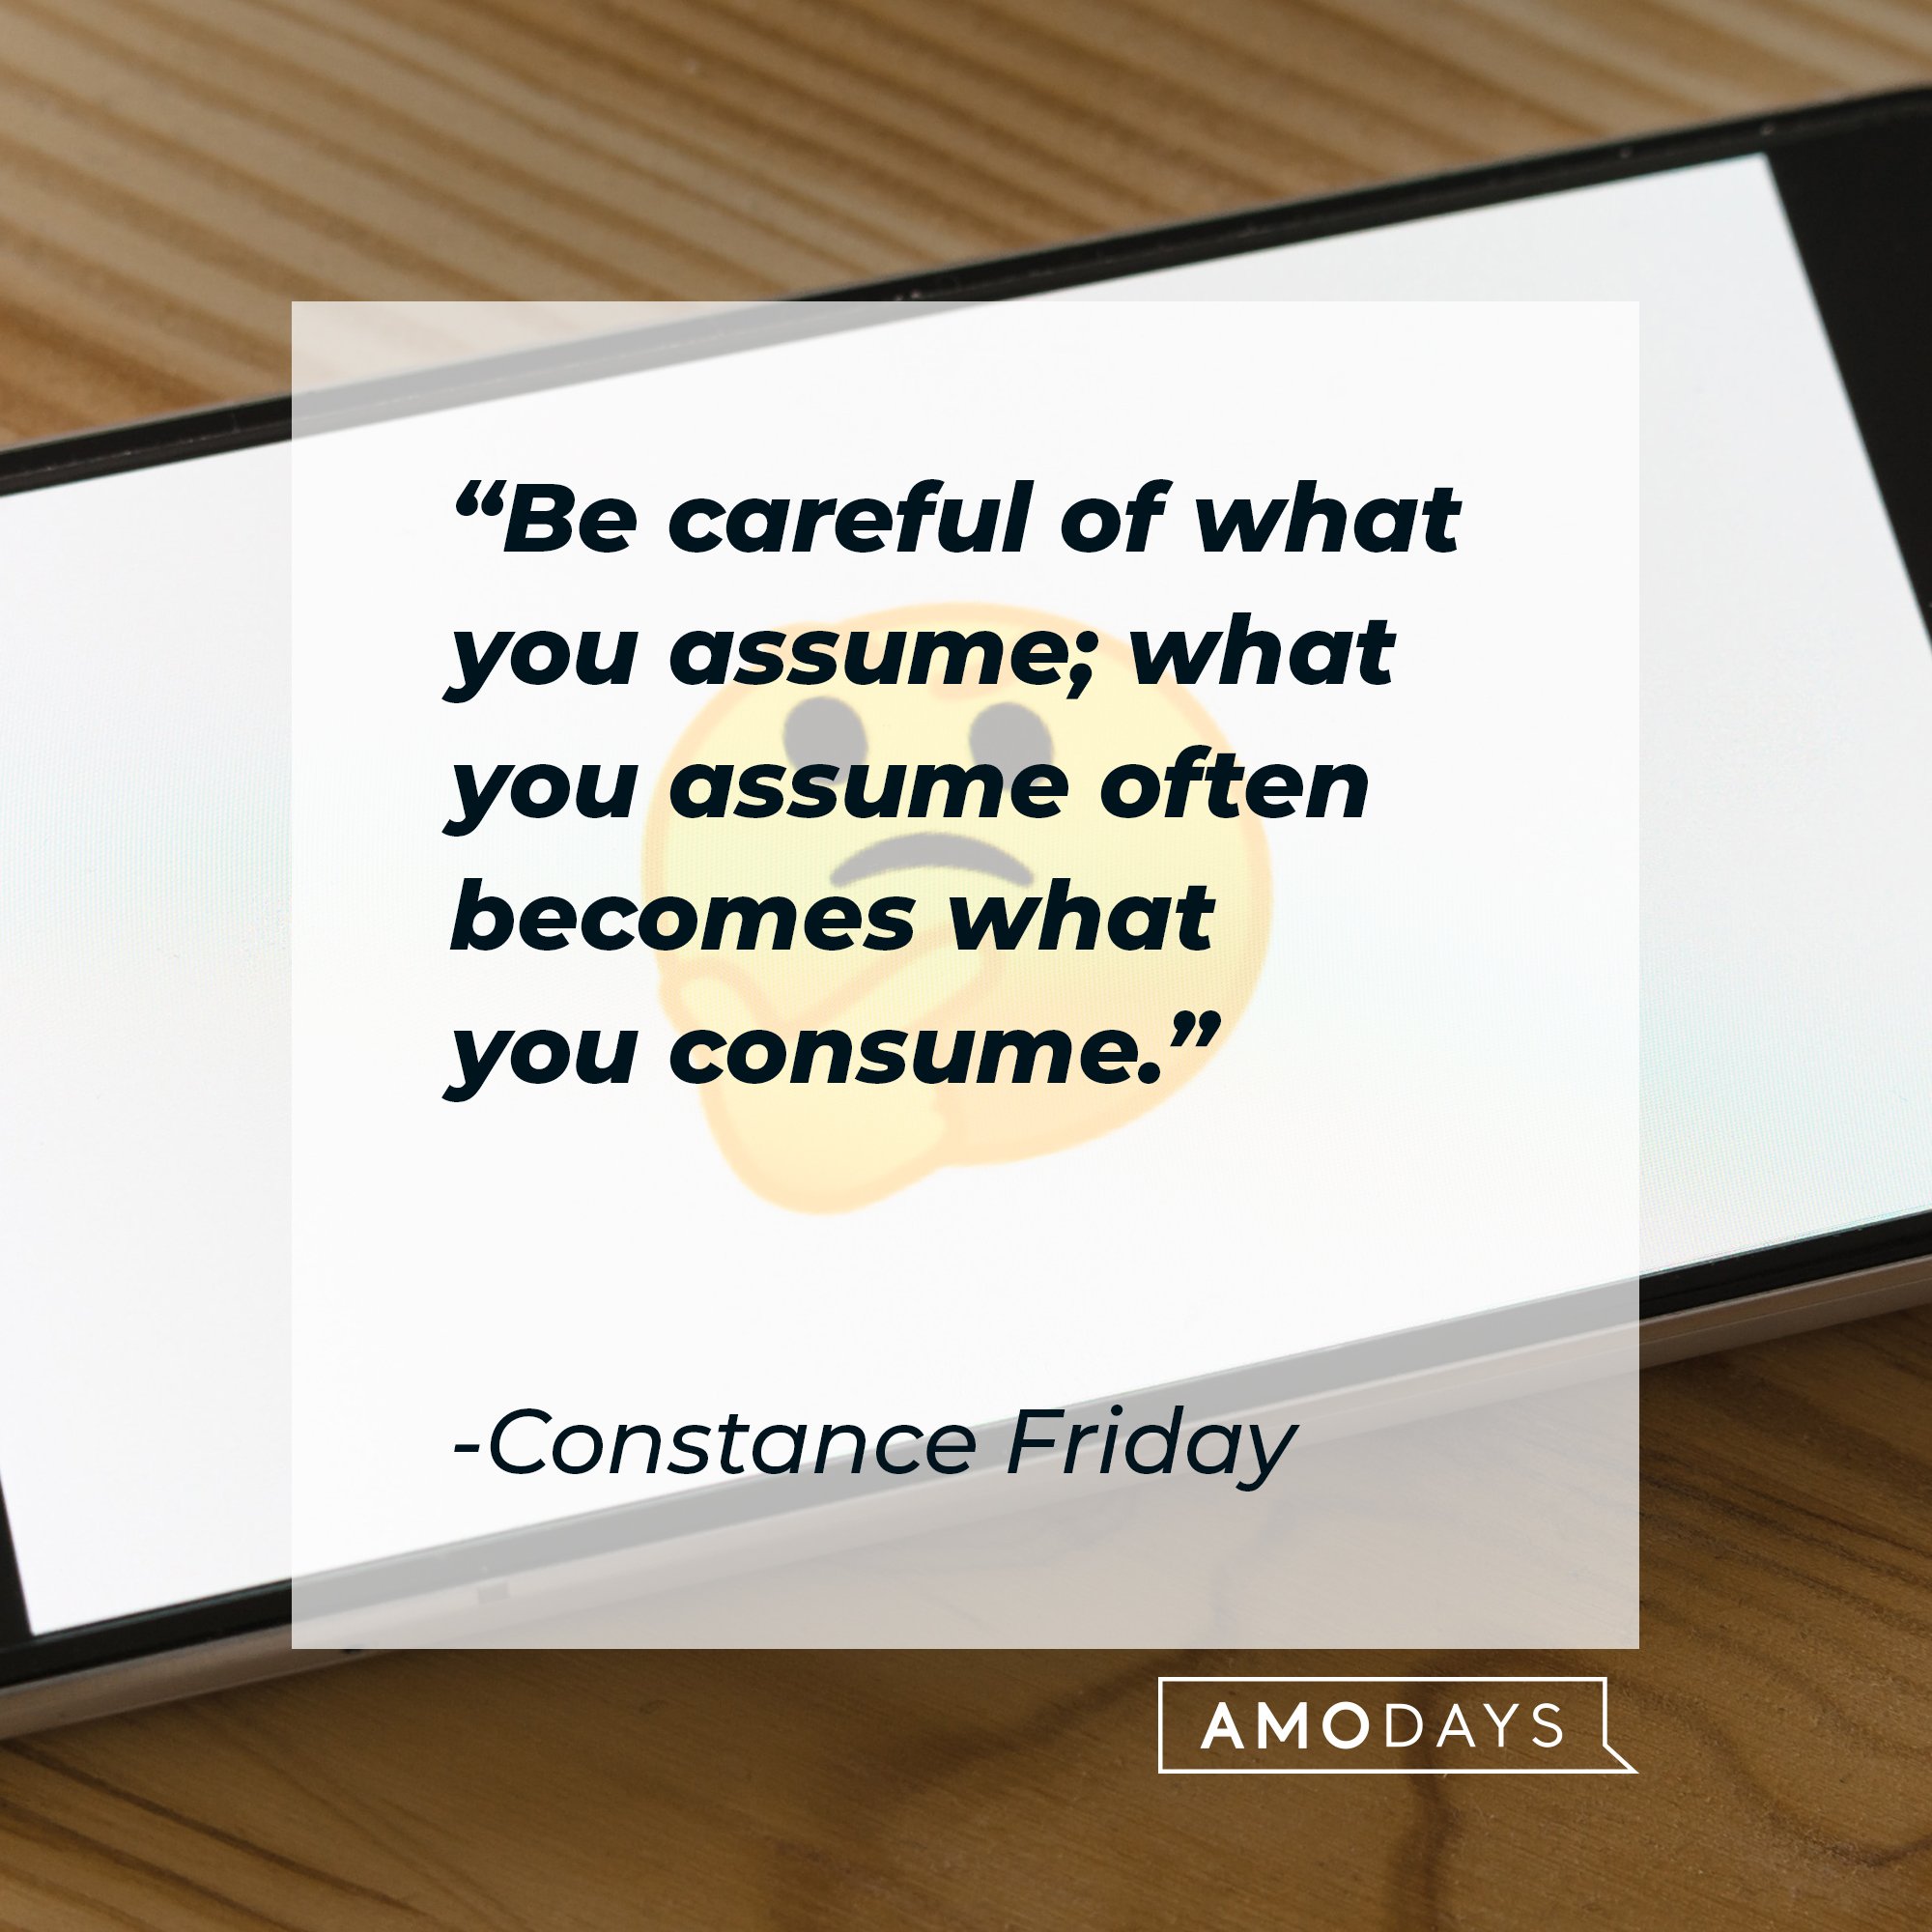 Constance Friday’s quote: "Be careful of what you assume; what you assume often becomes what you consume.” | Image: AmoDays 